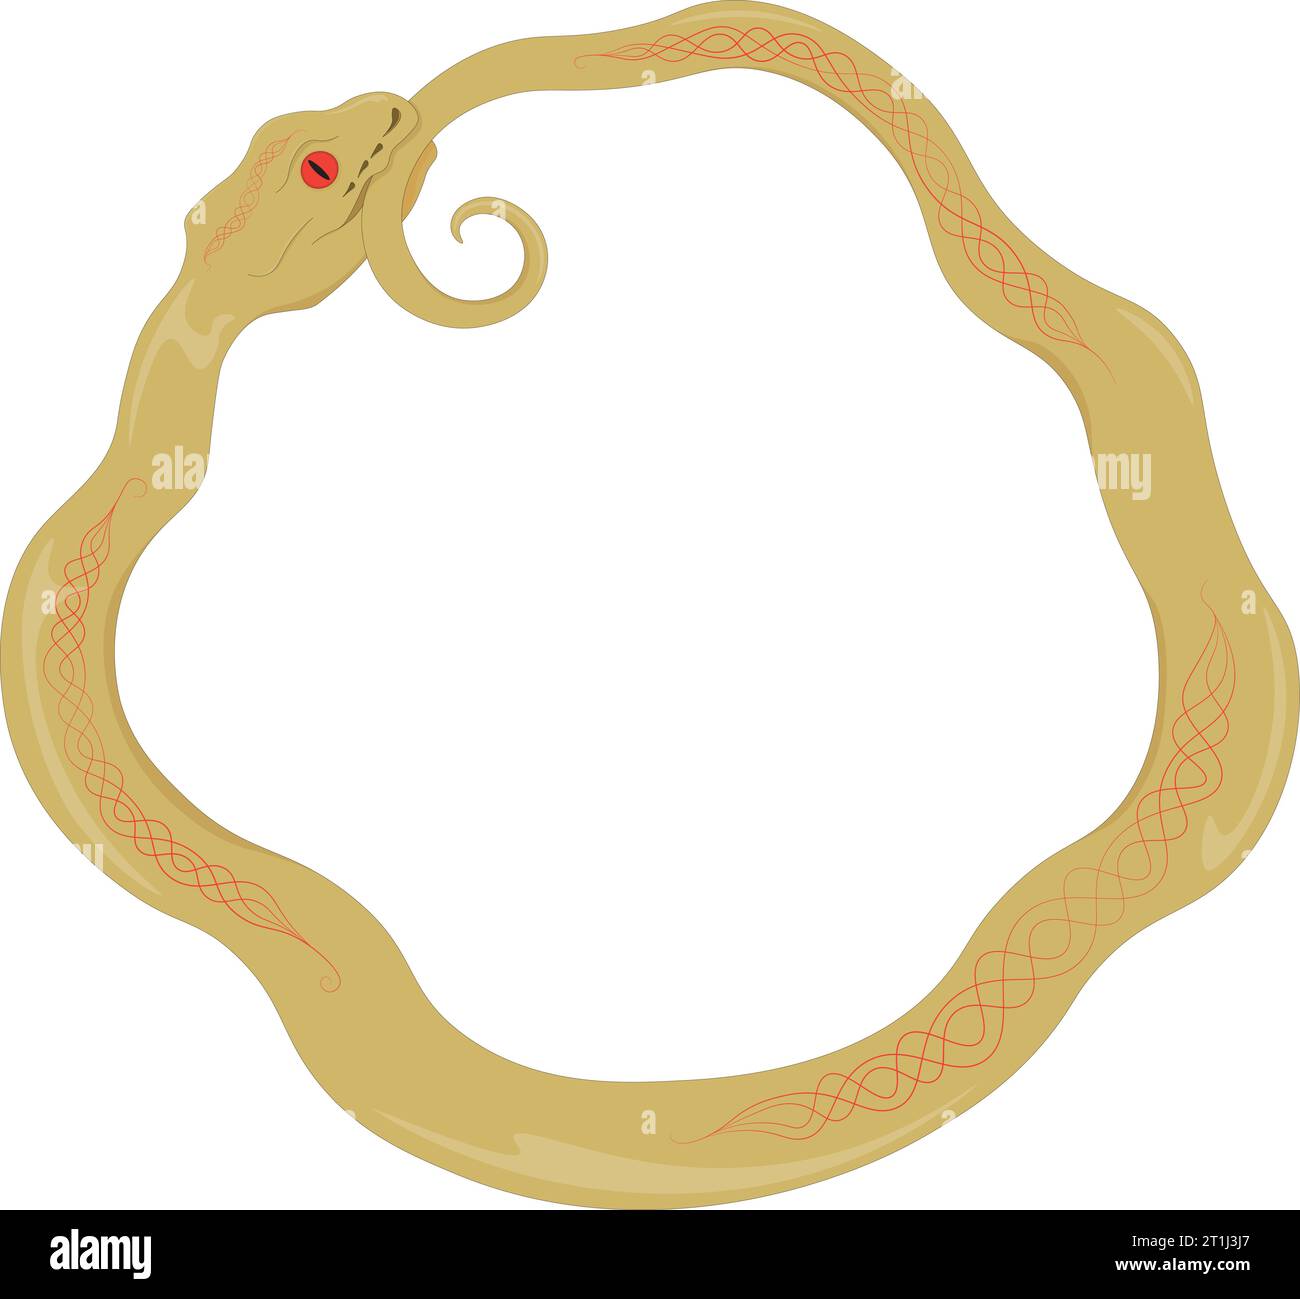 Ouroboros, the great snake biting its own tail vector illustration Stock Vector